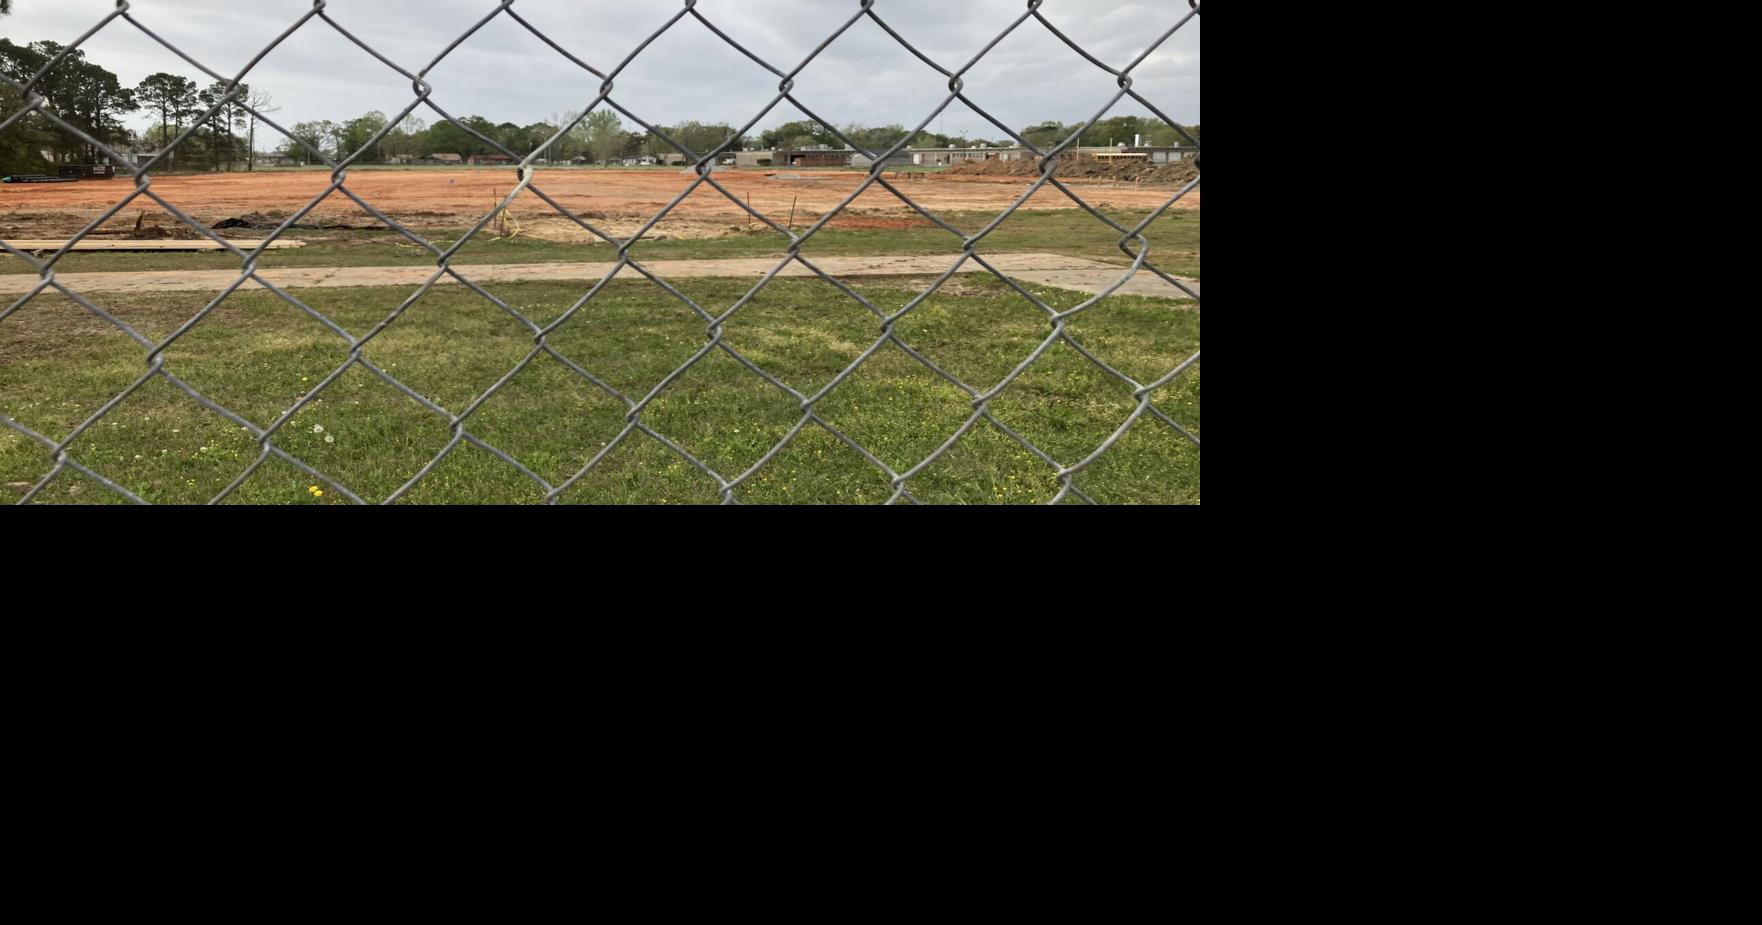 Five new MCPSS football stadiums won’t be ready for 2022 season Local